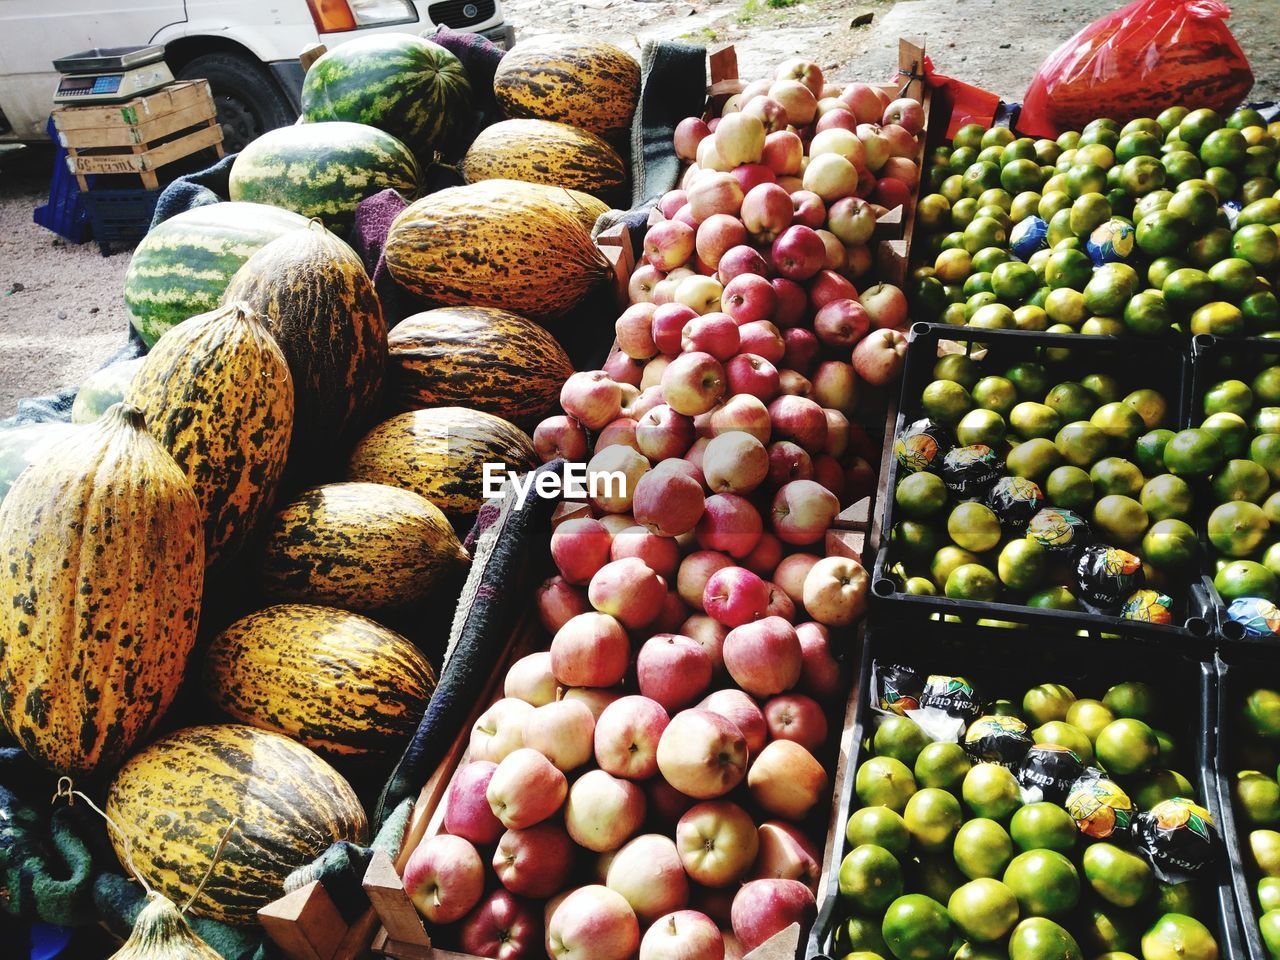 HIGH ANGLE VIEW OF VEGETABLES FOR SALE AT MARKET STALL